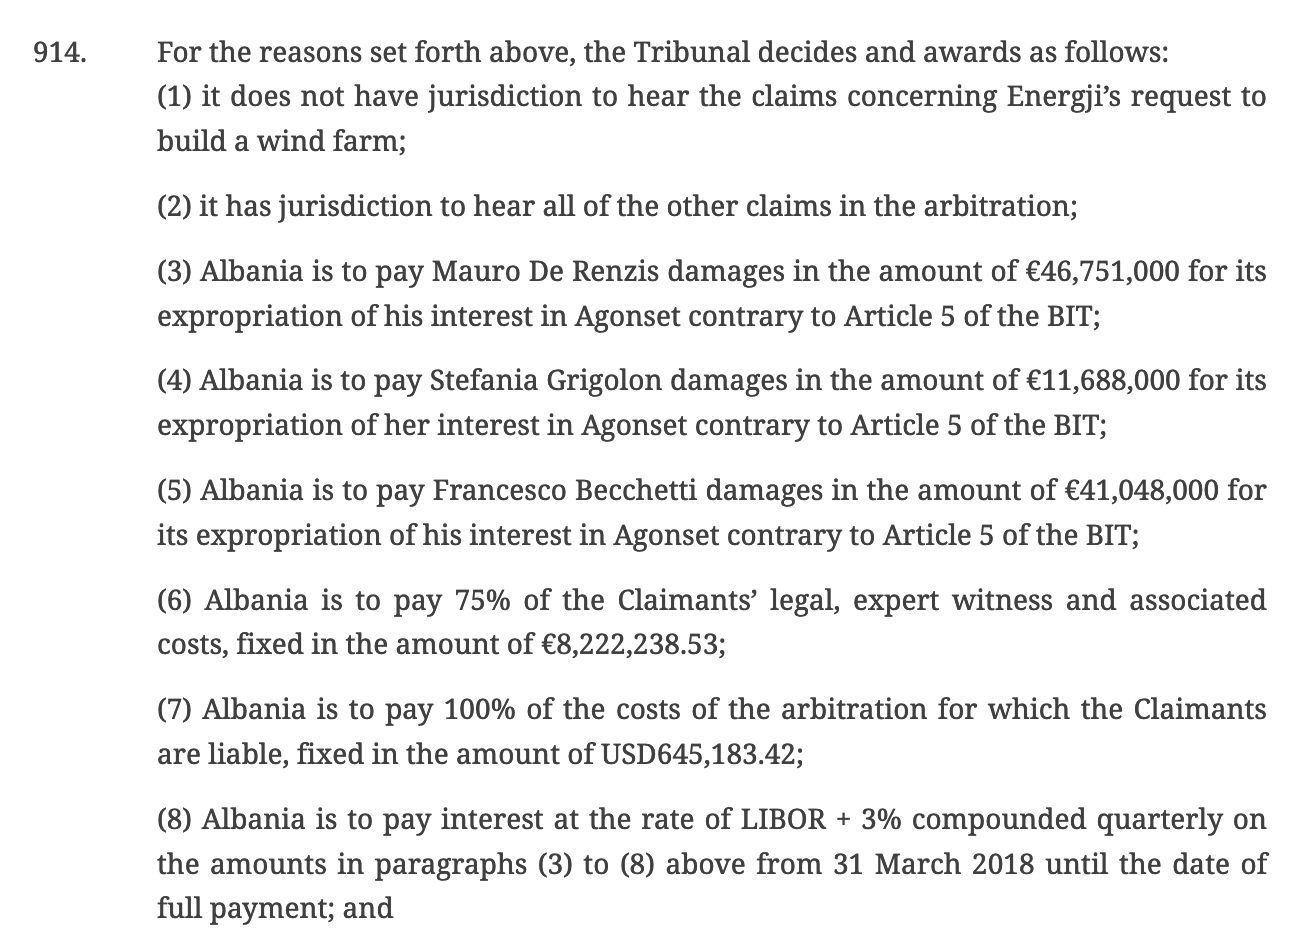 Screenshot of Award in the arbitration case of Hydro Srl et al. against the Republic of Albania